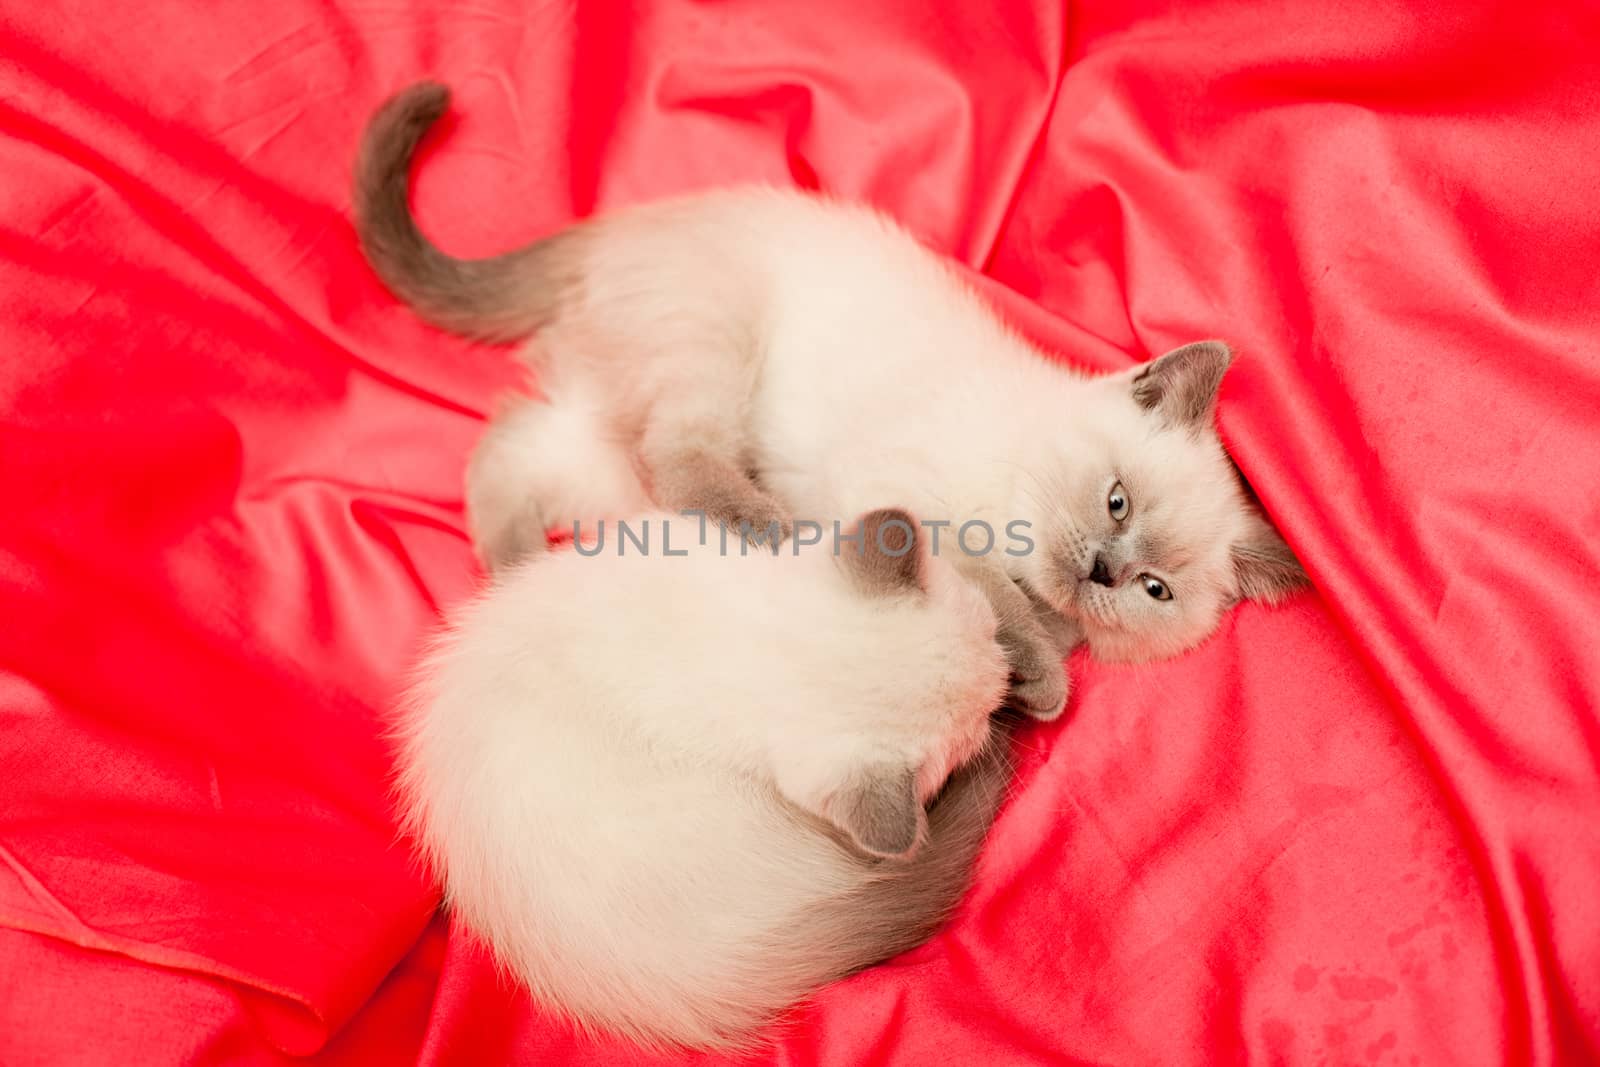 Two white and grey kittens on pink background
